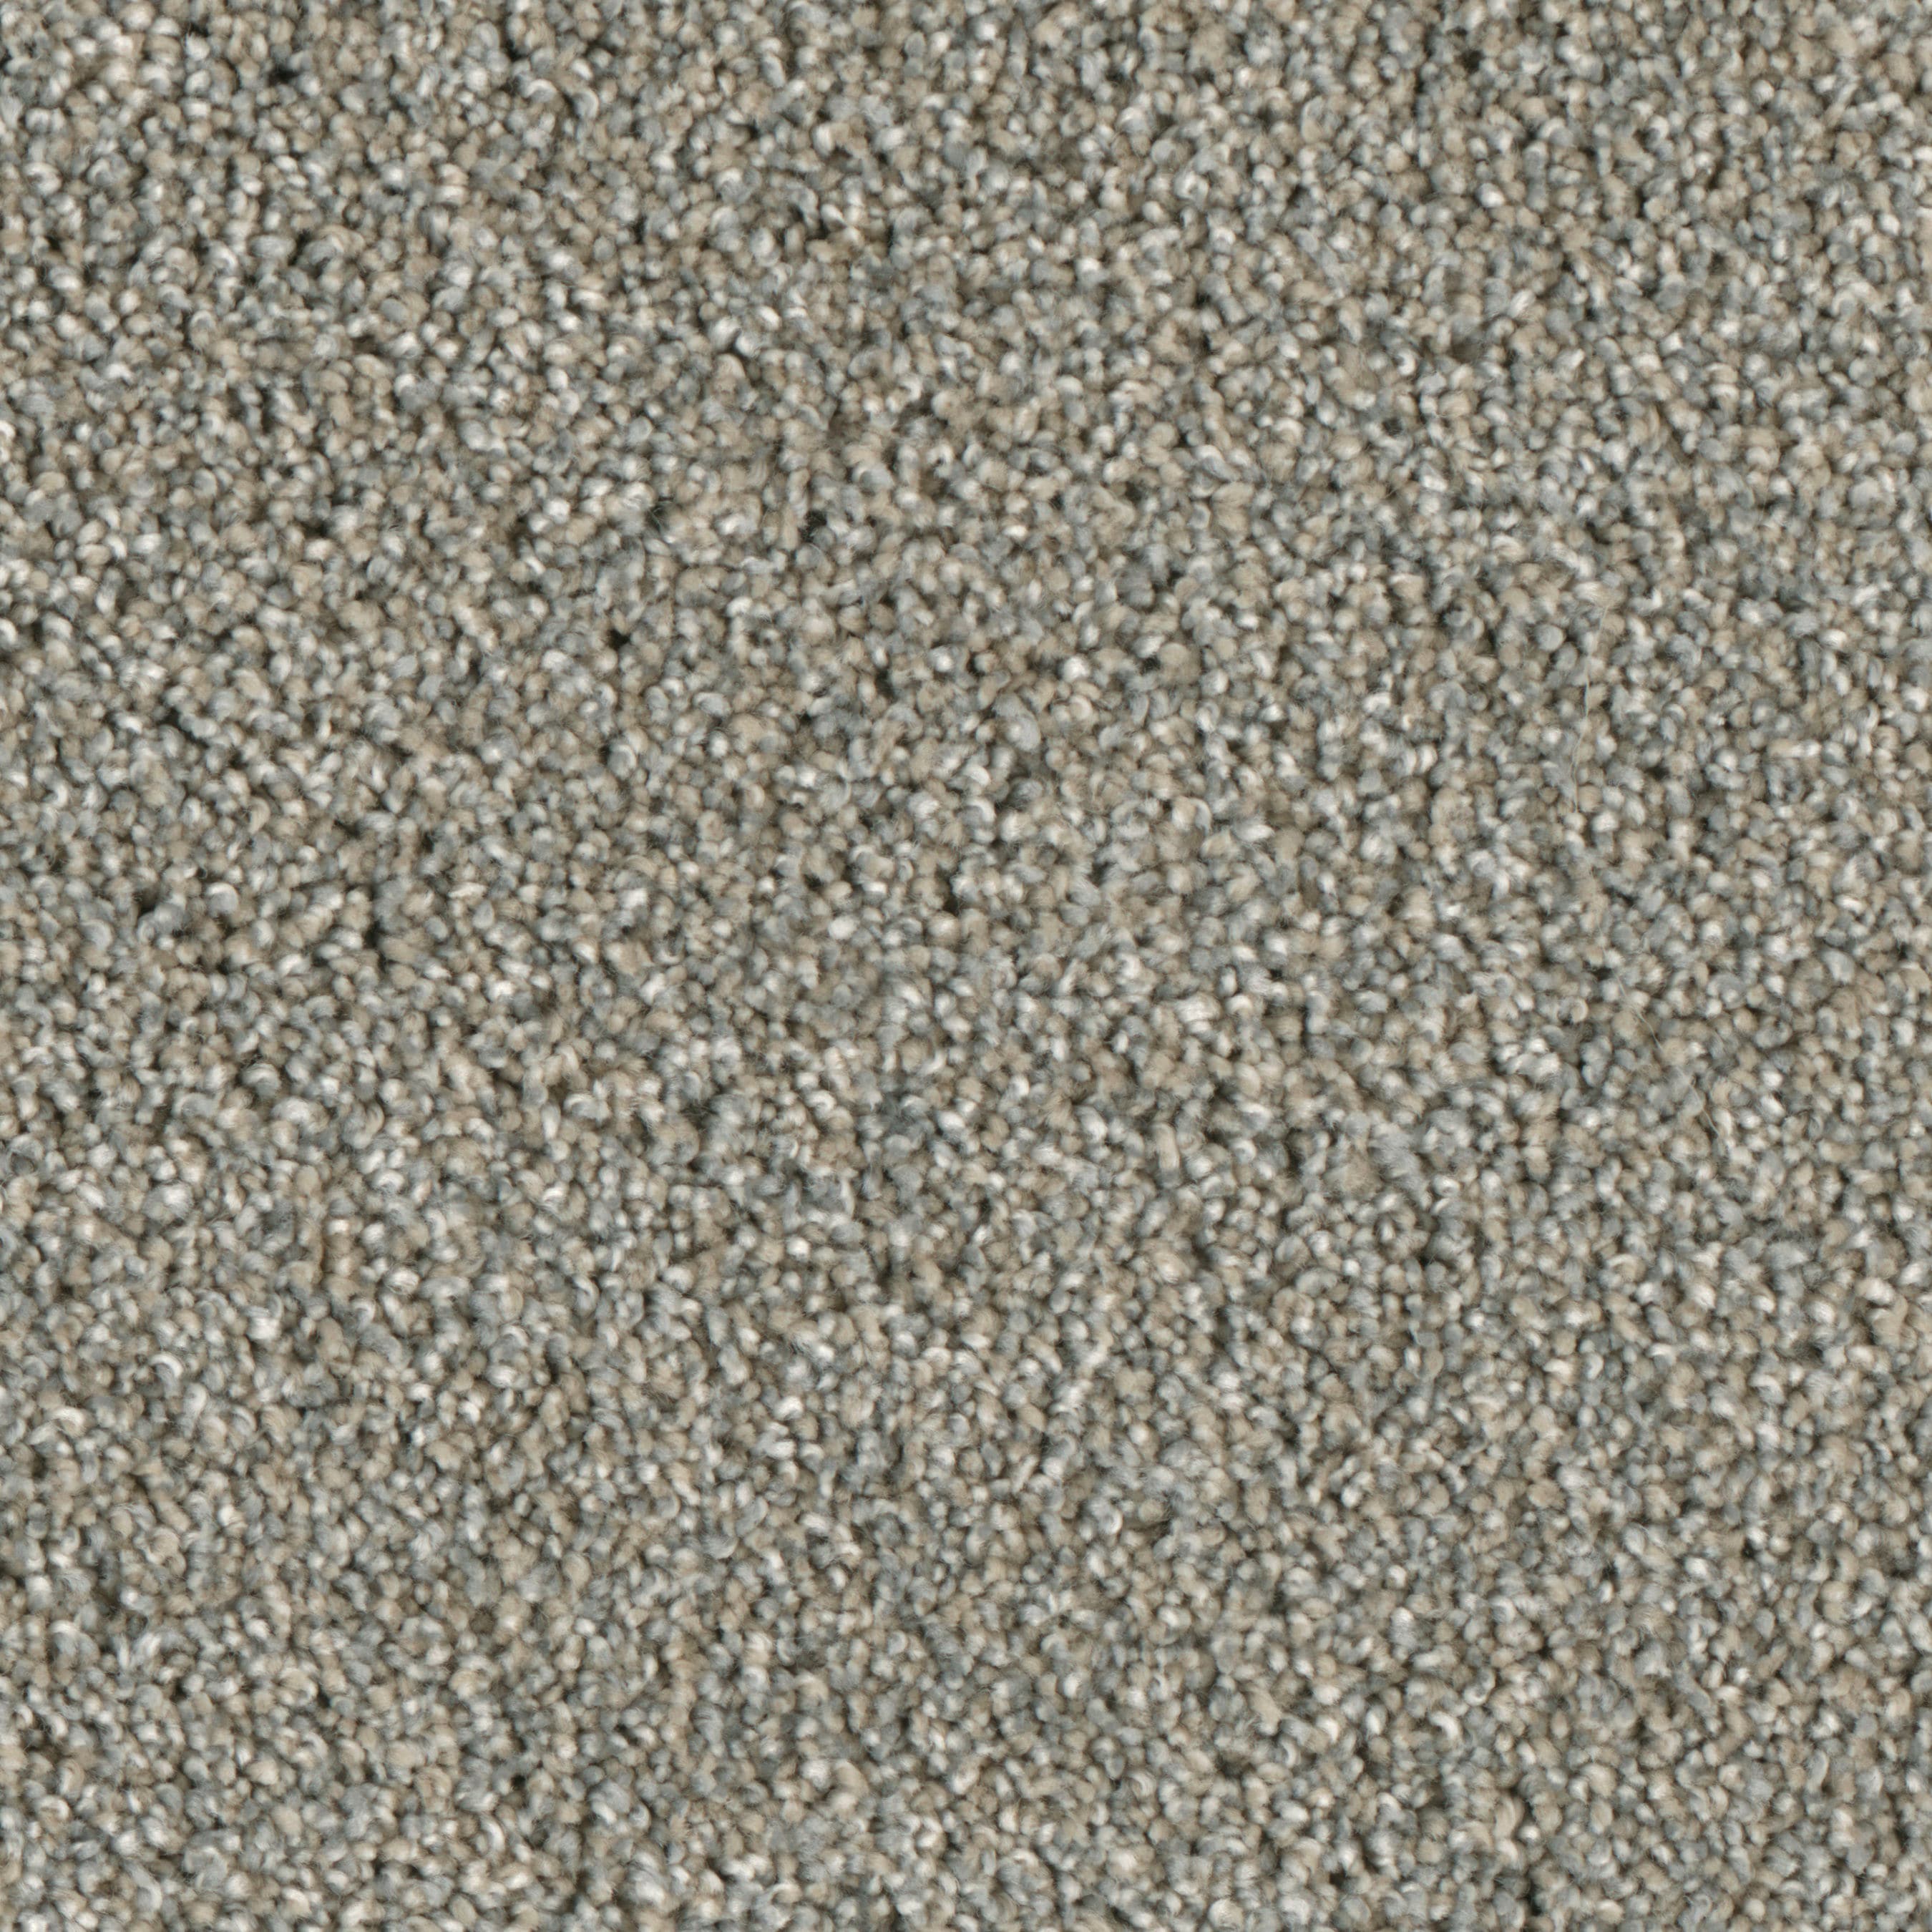 (Sample) Lenox Park District Textured Indoor Carpet | - STAINMASTER S9255-912-S